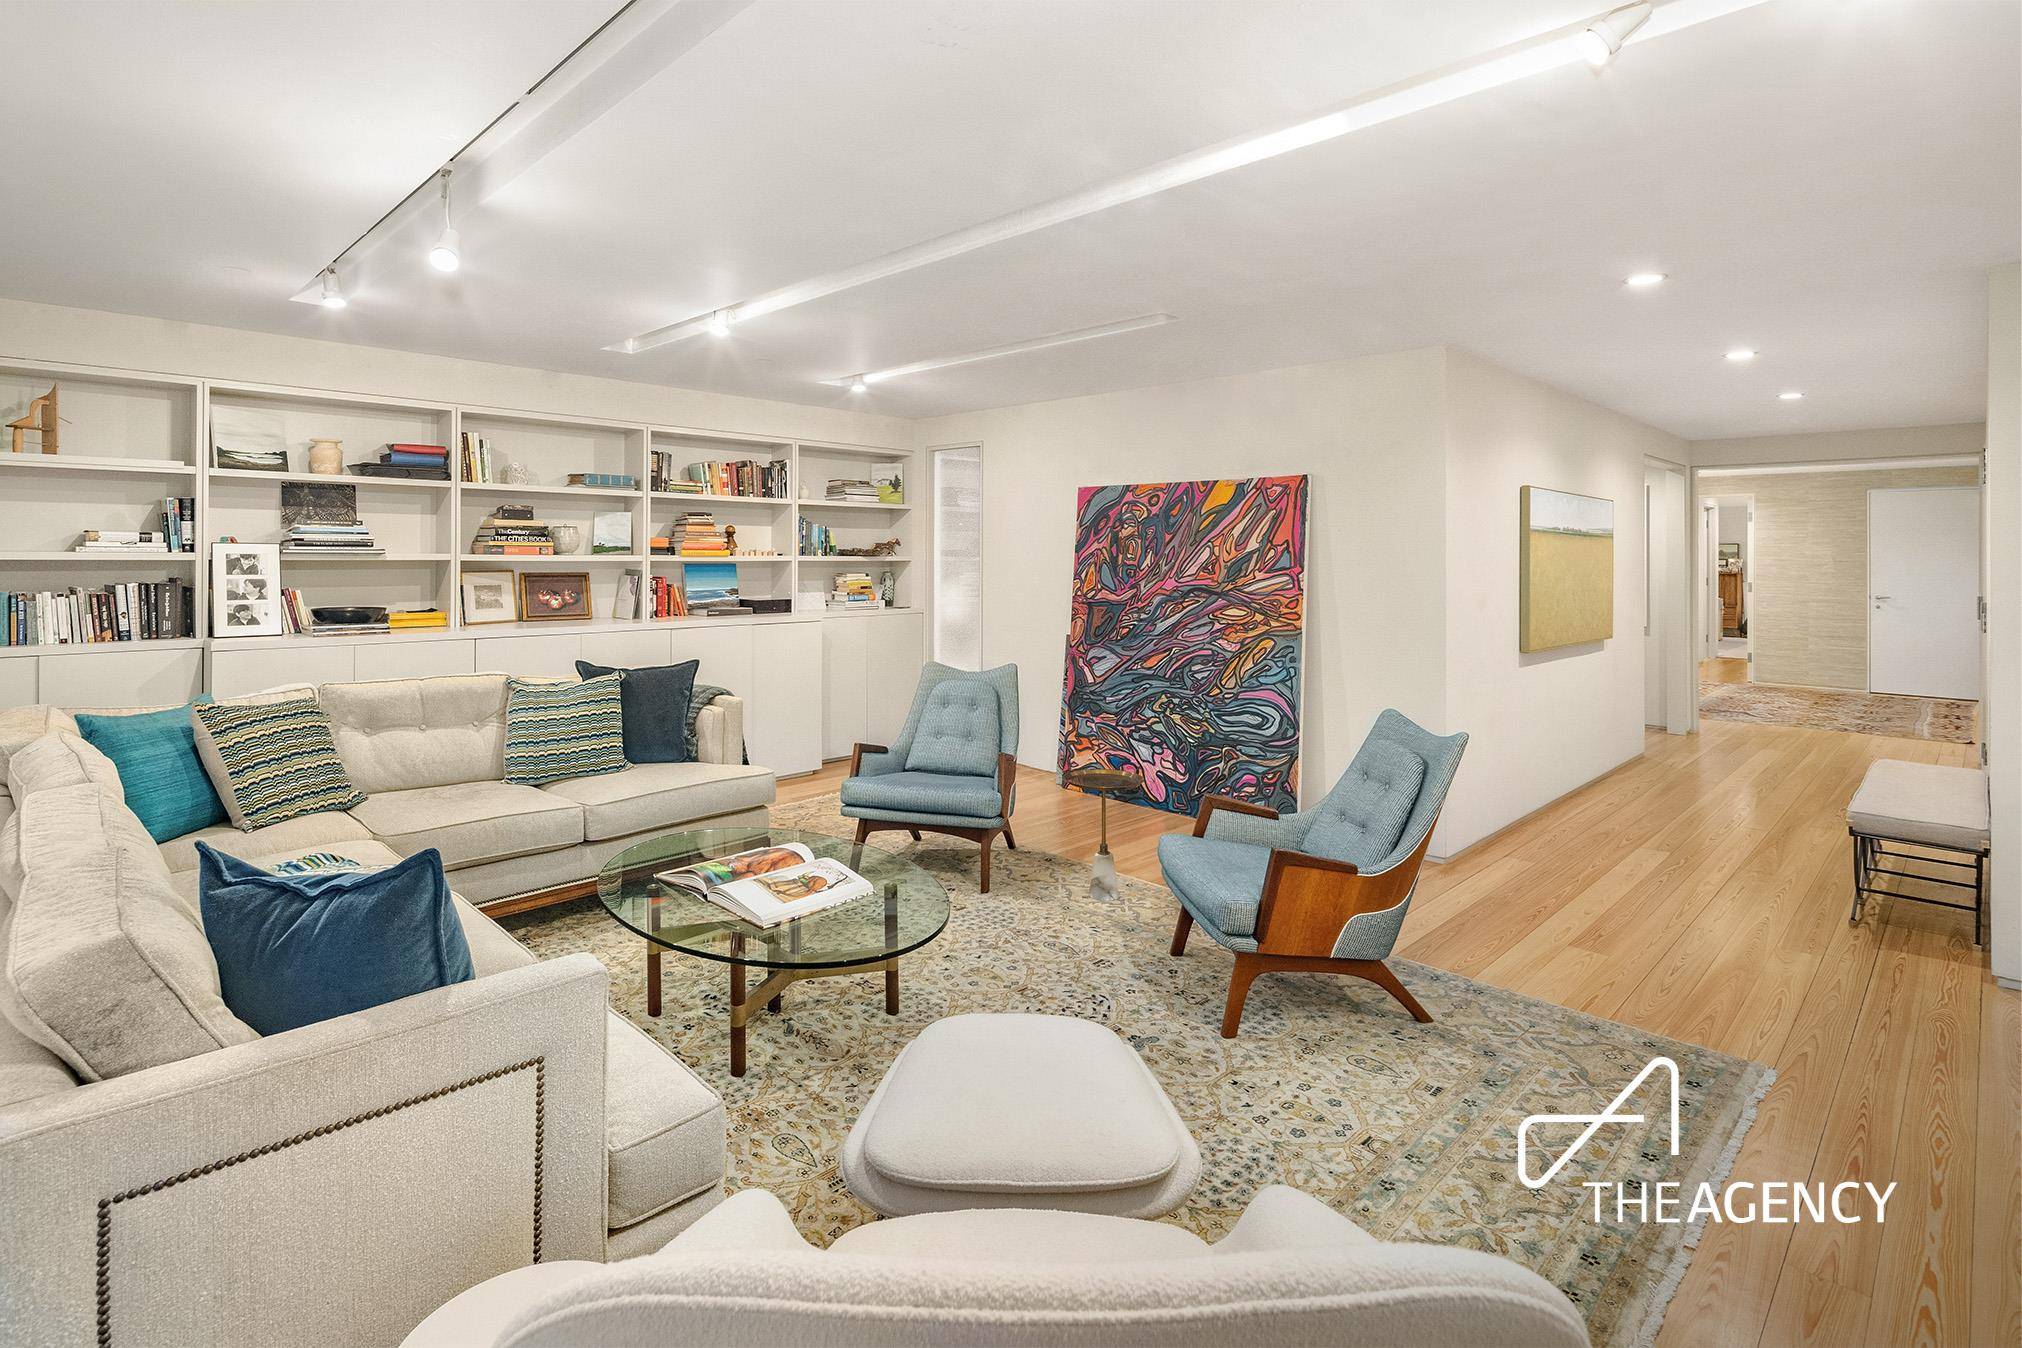 Nestled in the heart of Hudson Square, this impeccably renovated 3, 100 square foot condo loft epitomizes contemporary urban luxury.